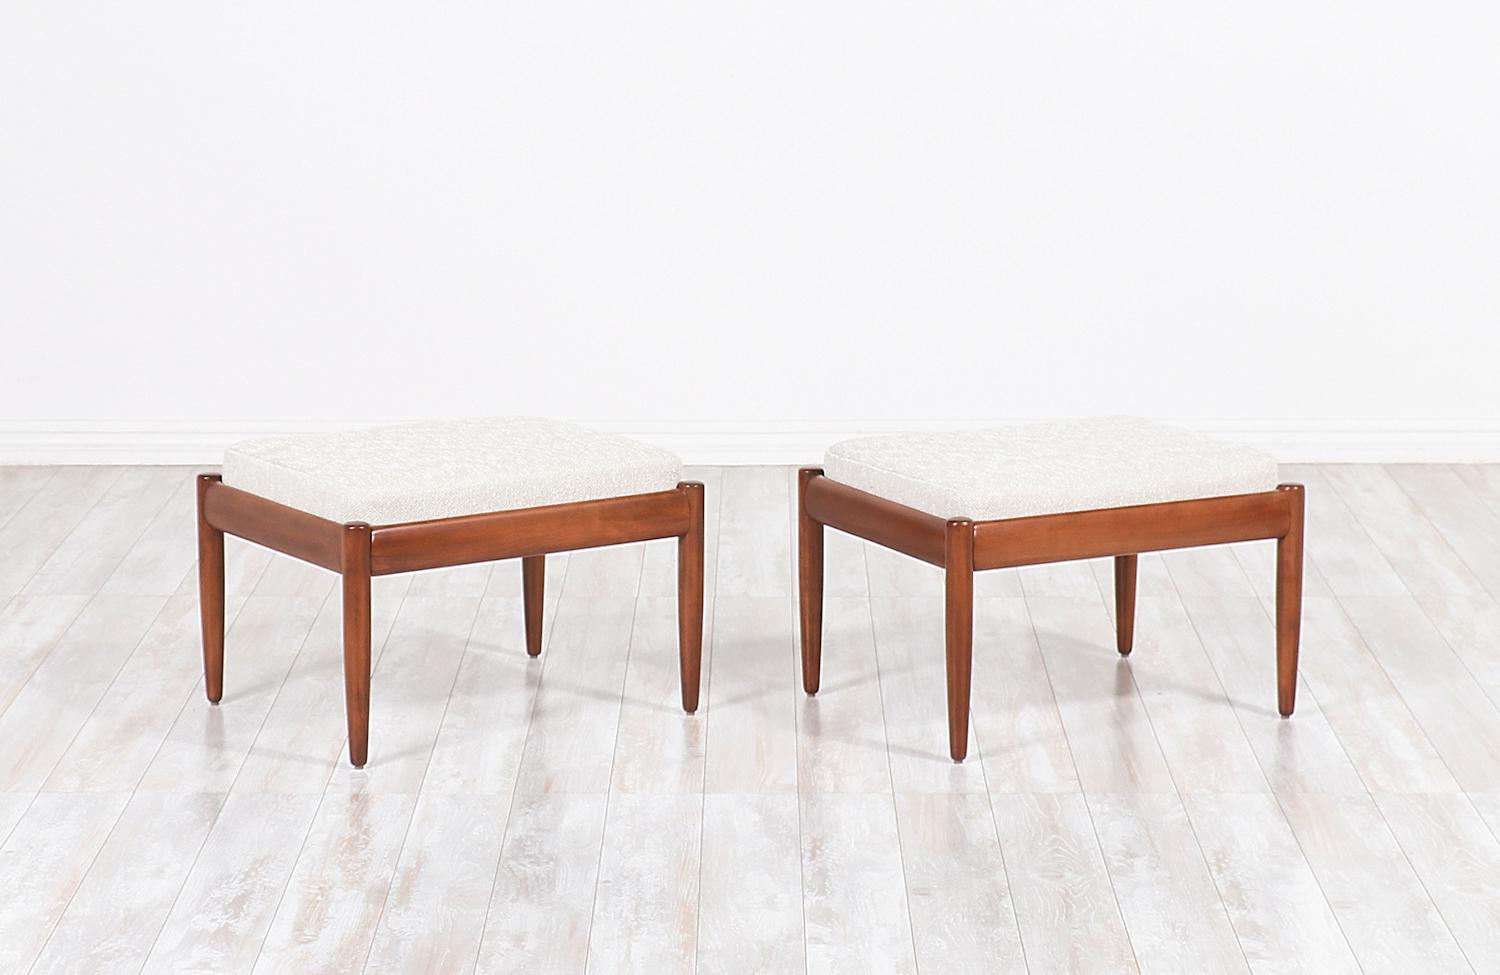 Pair of Mid-Century Modern stools designed by Peter Hvidt for France & Søn in Denmark, circa 1960s. This gorgeous and exceptionally crafted design features a sculpted solid walnut wood frame with sleek tapered legs and new strong springs that